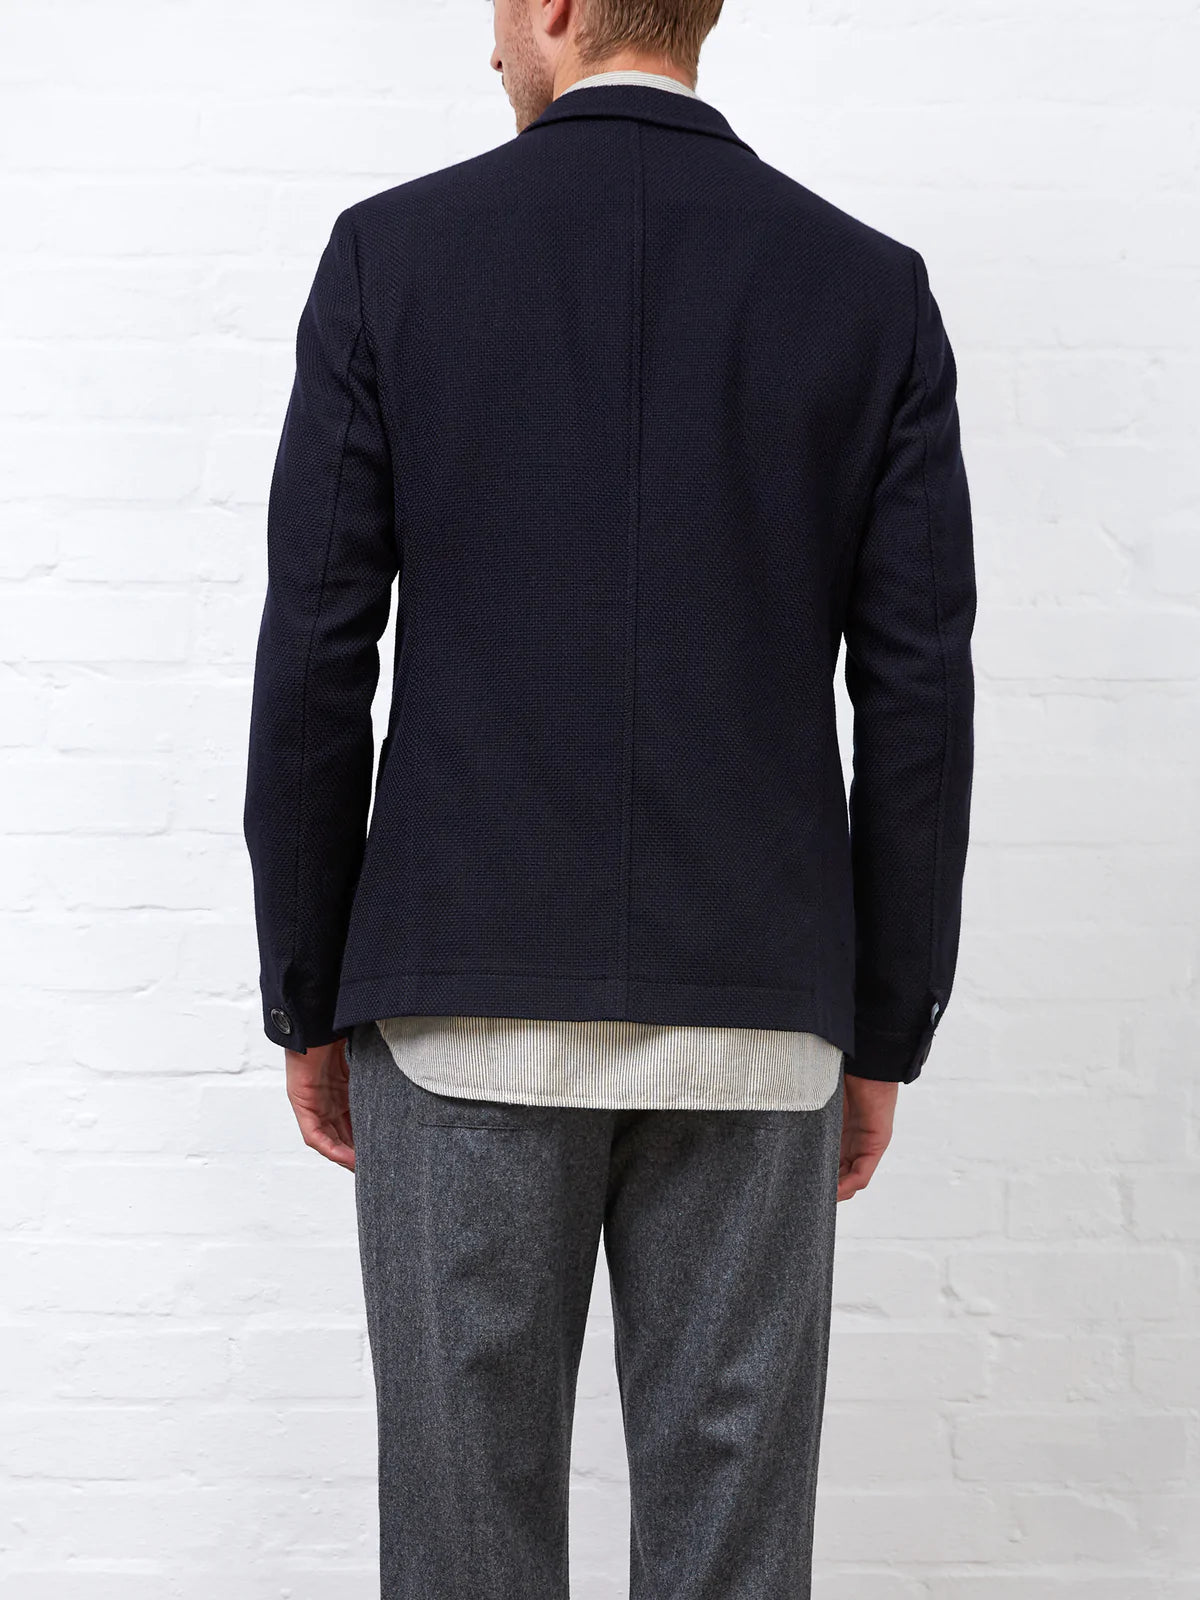 SOLMS JACKET - CARWIN NAVY